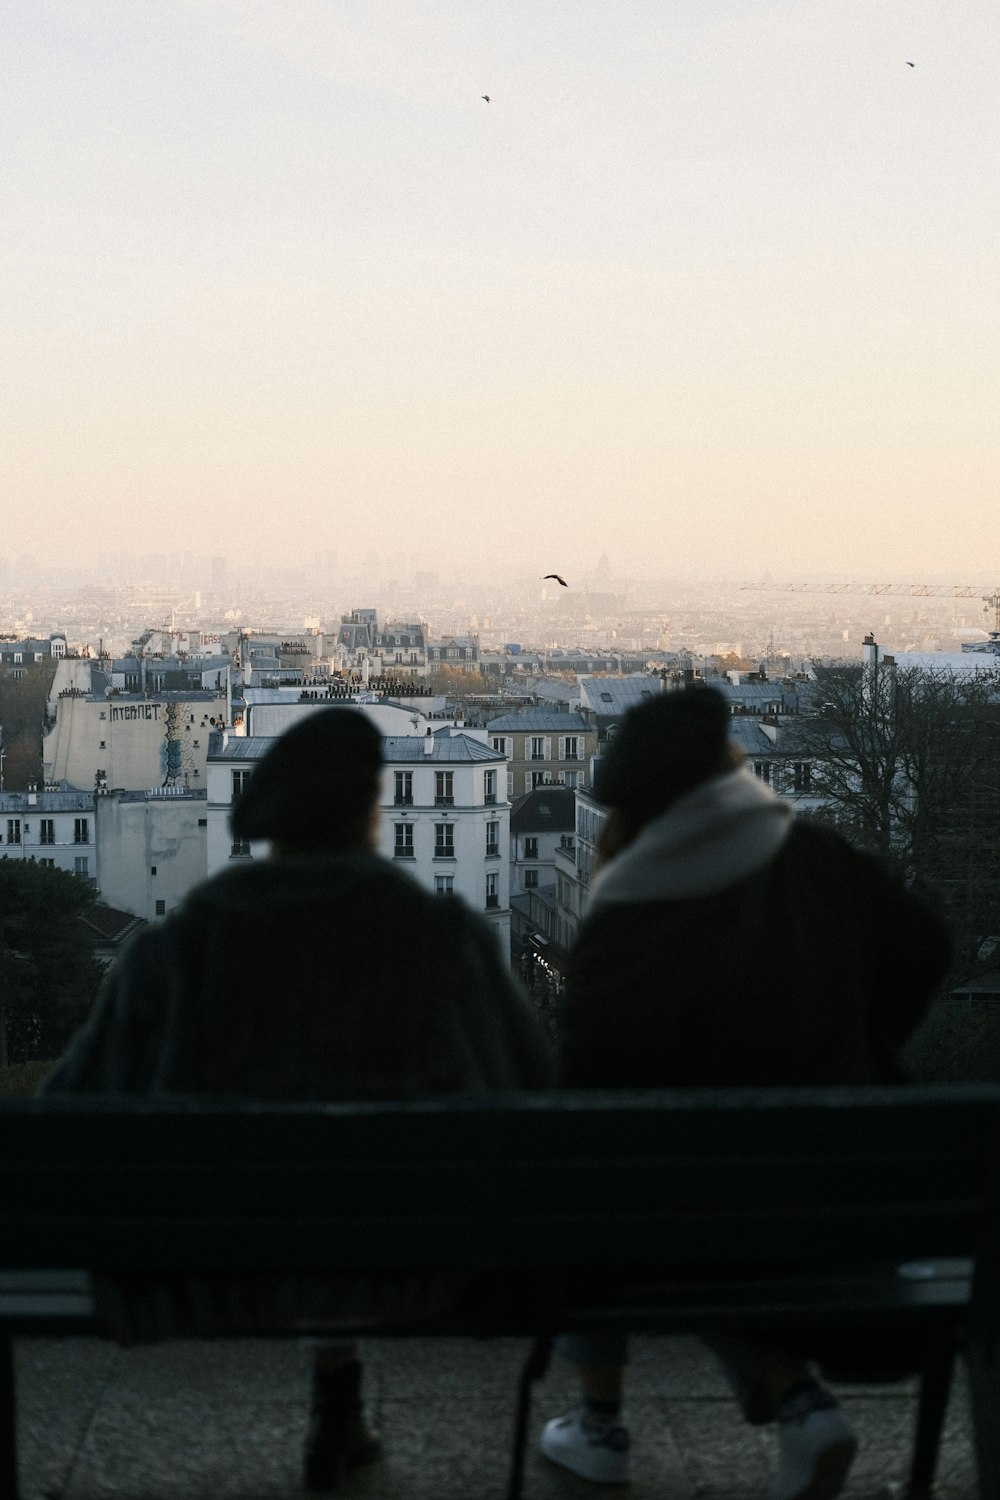 two people sitting on a bench overlooking a city